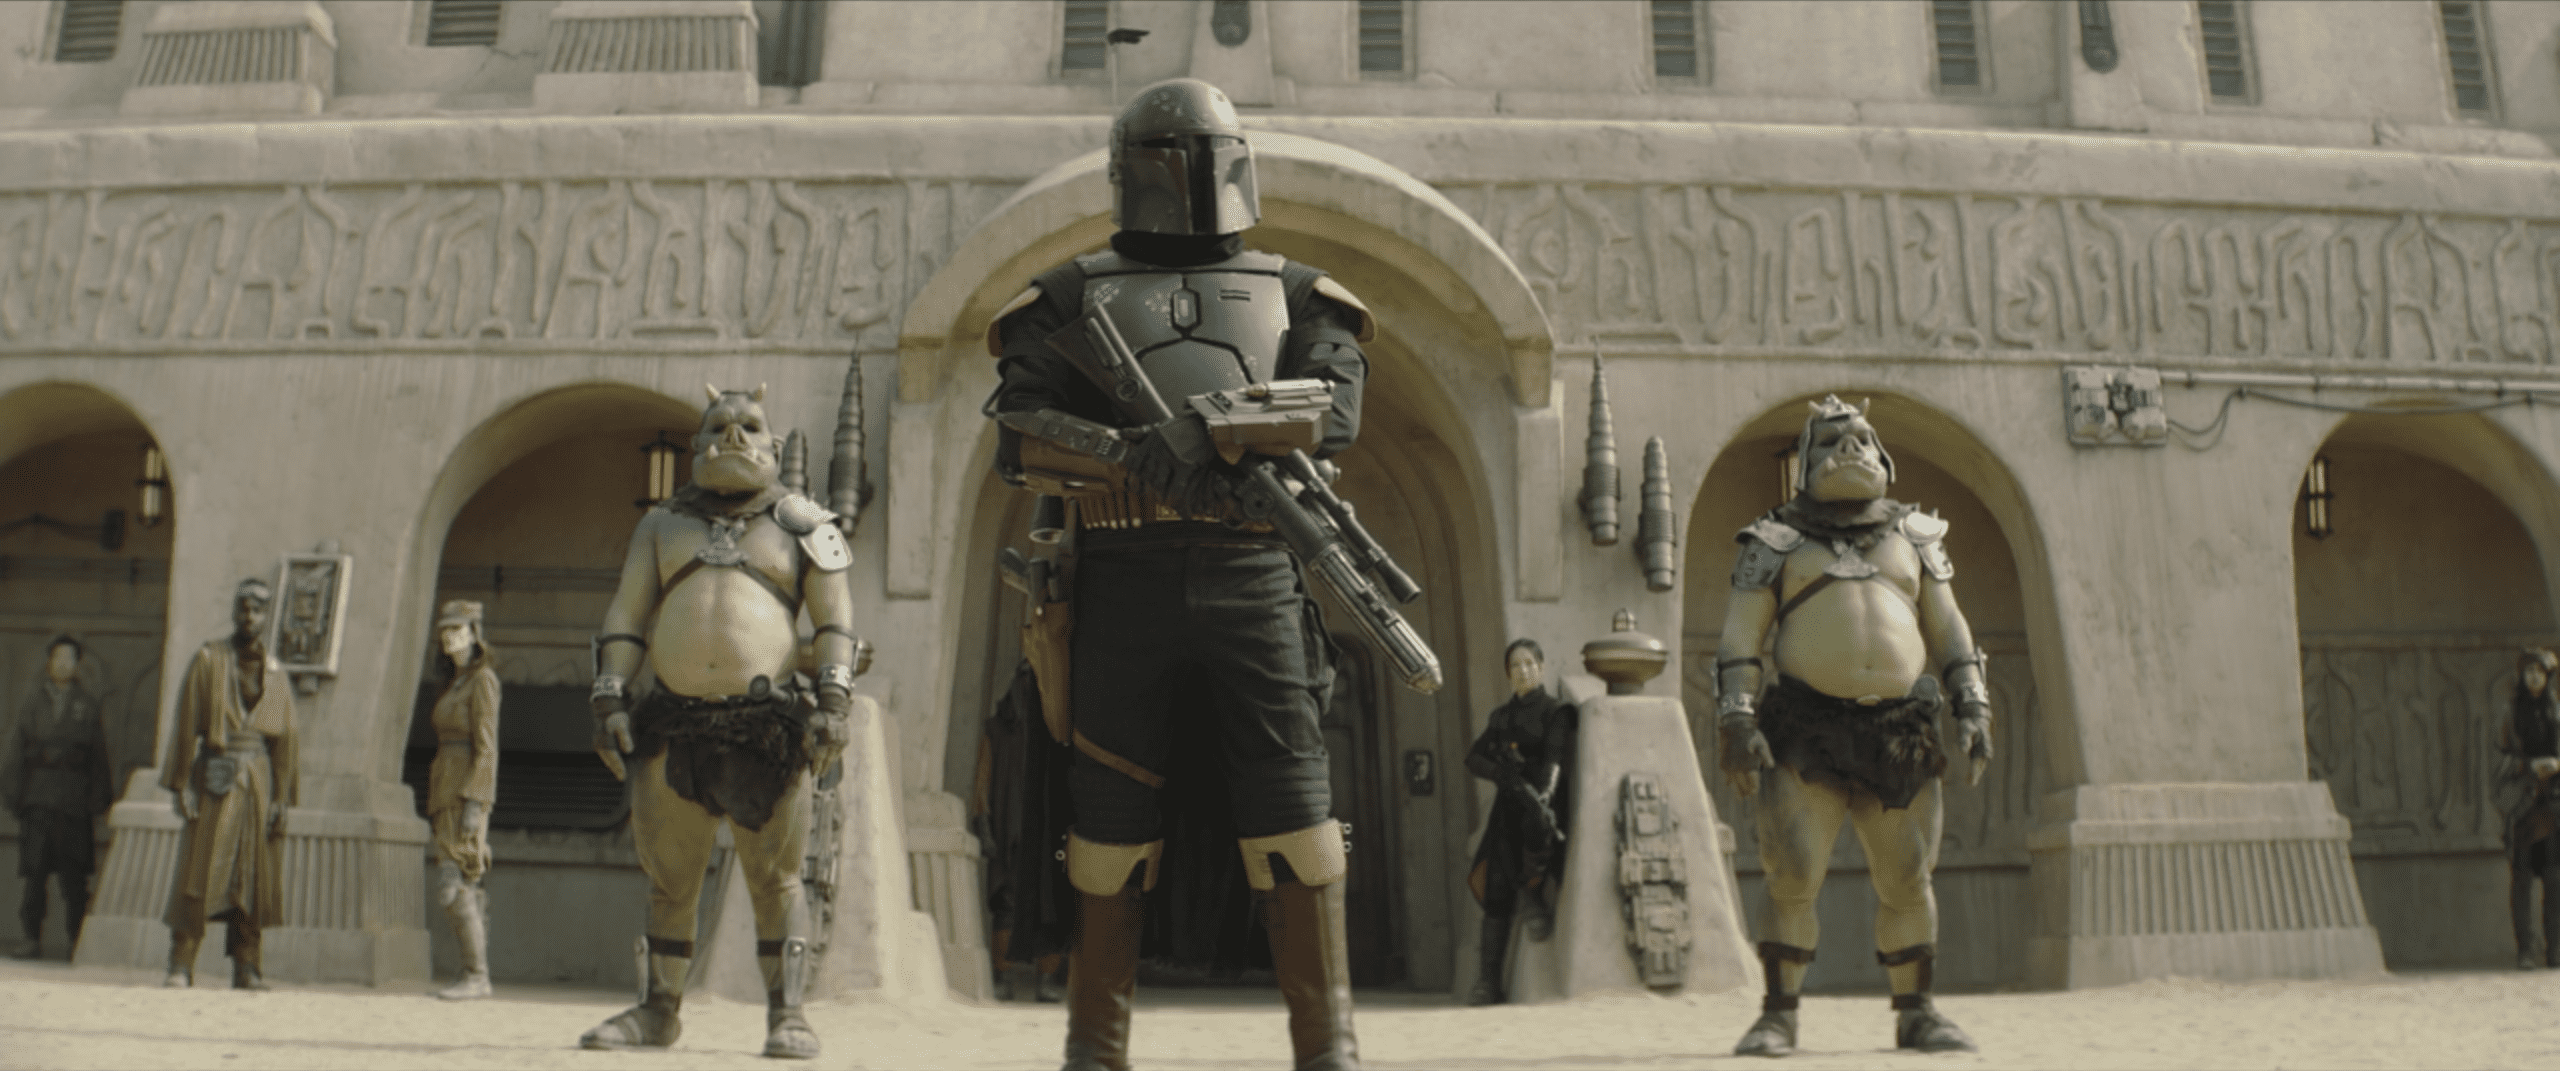 Boba Fett and his crew in the streets of Mos Espa